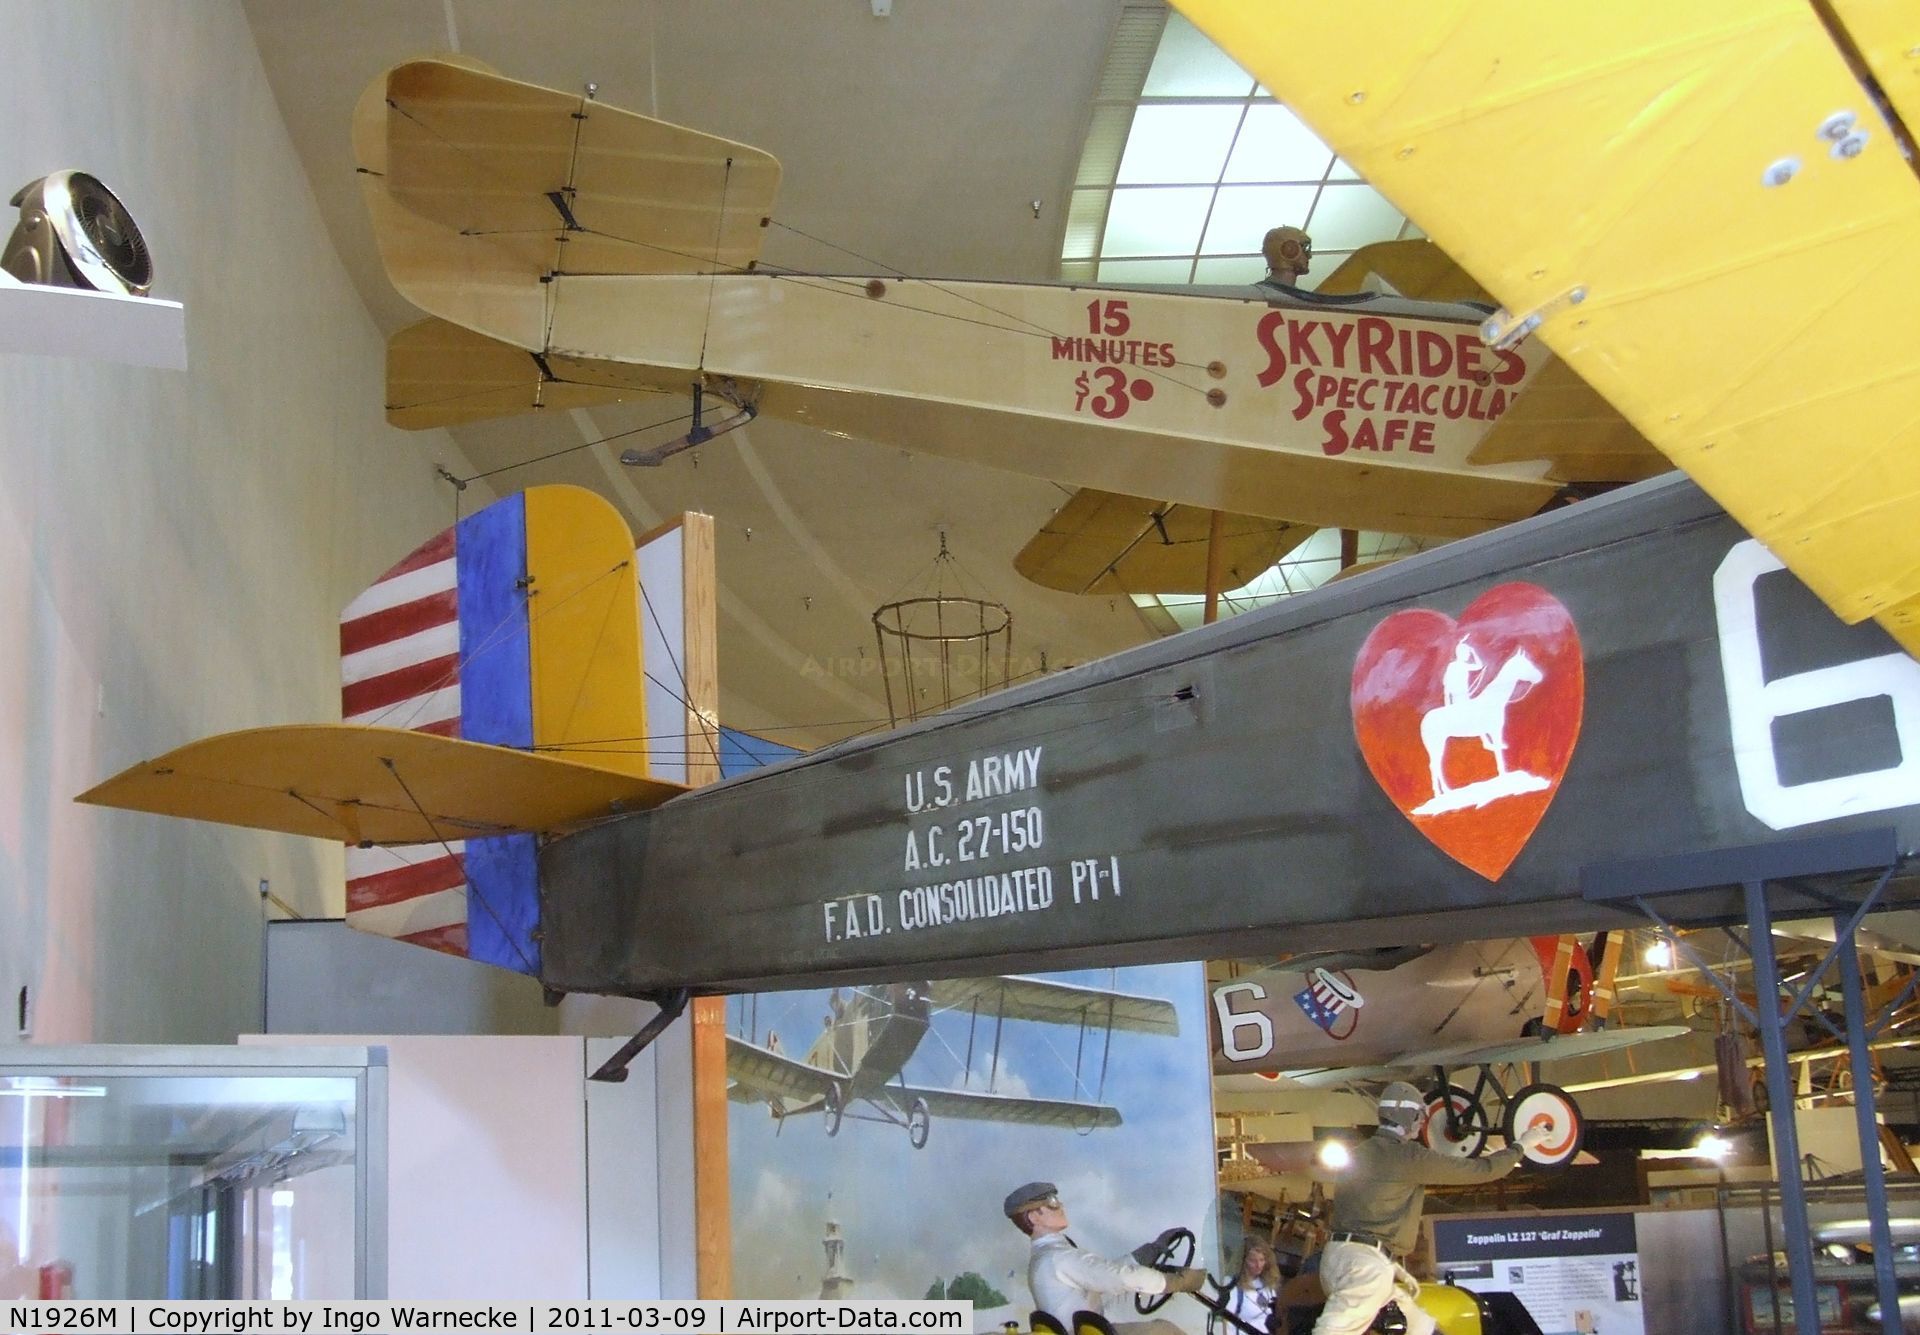 N1926M, Consolidated PT-1 C/N AC27150, Consolidated PT-1 at the San Diego Air & Space Museum, San Diego CA